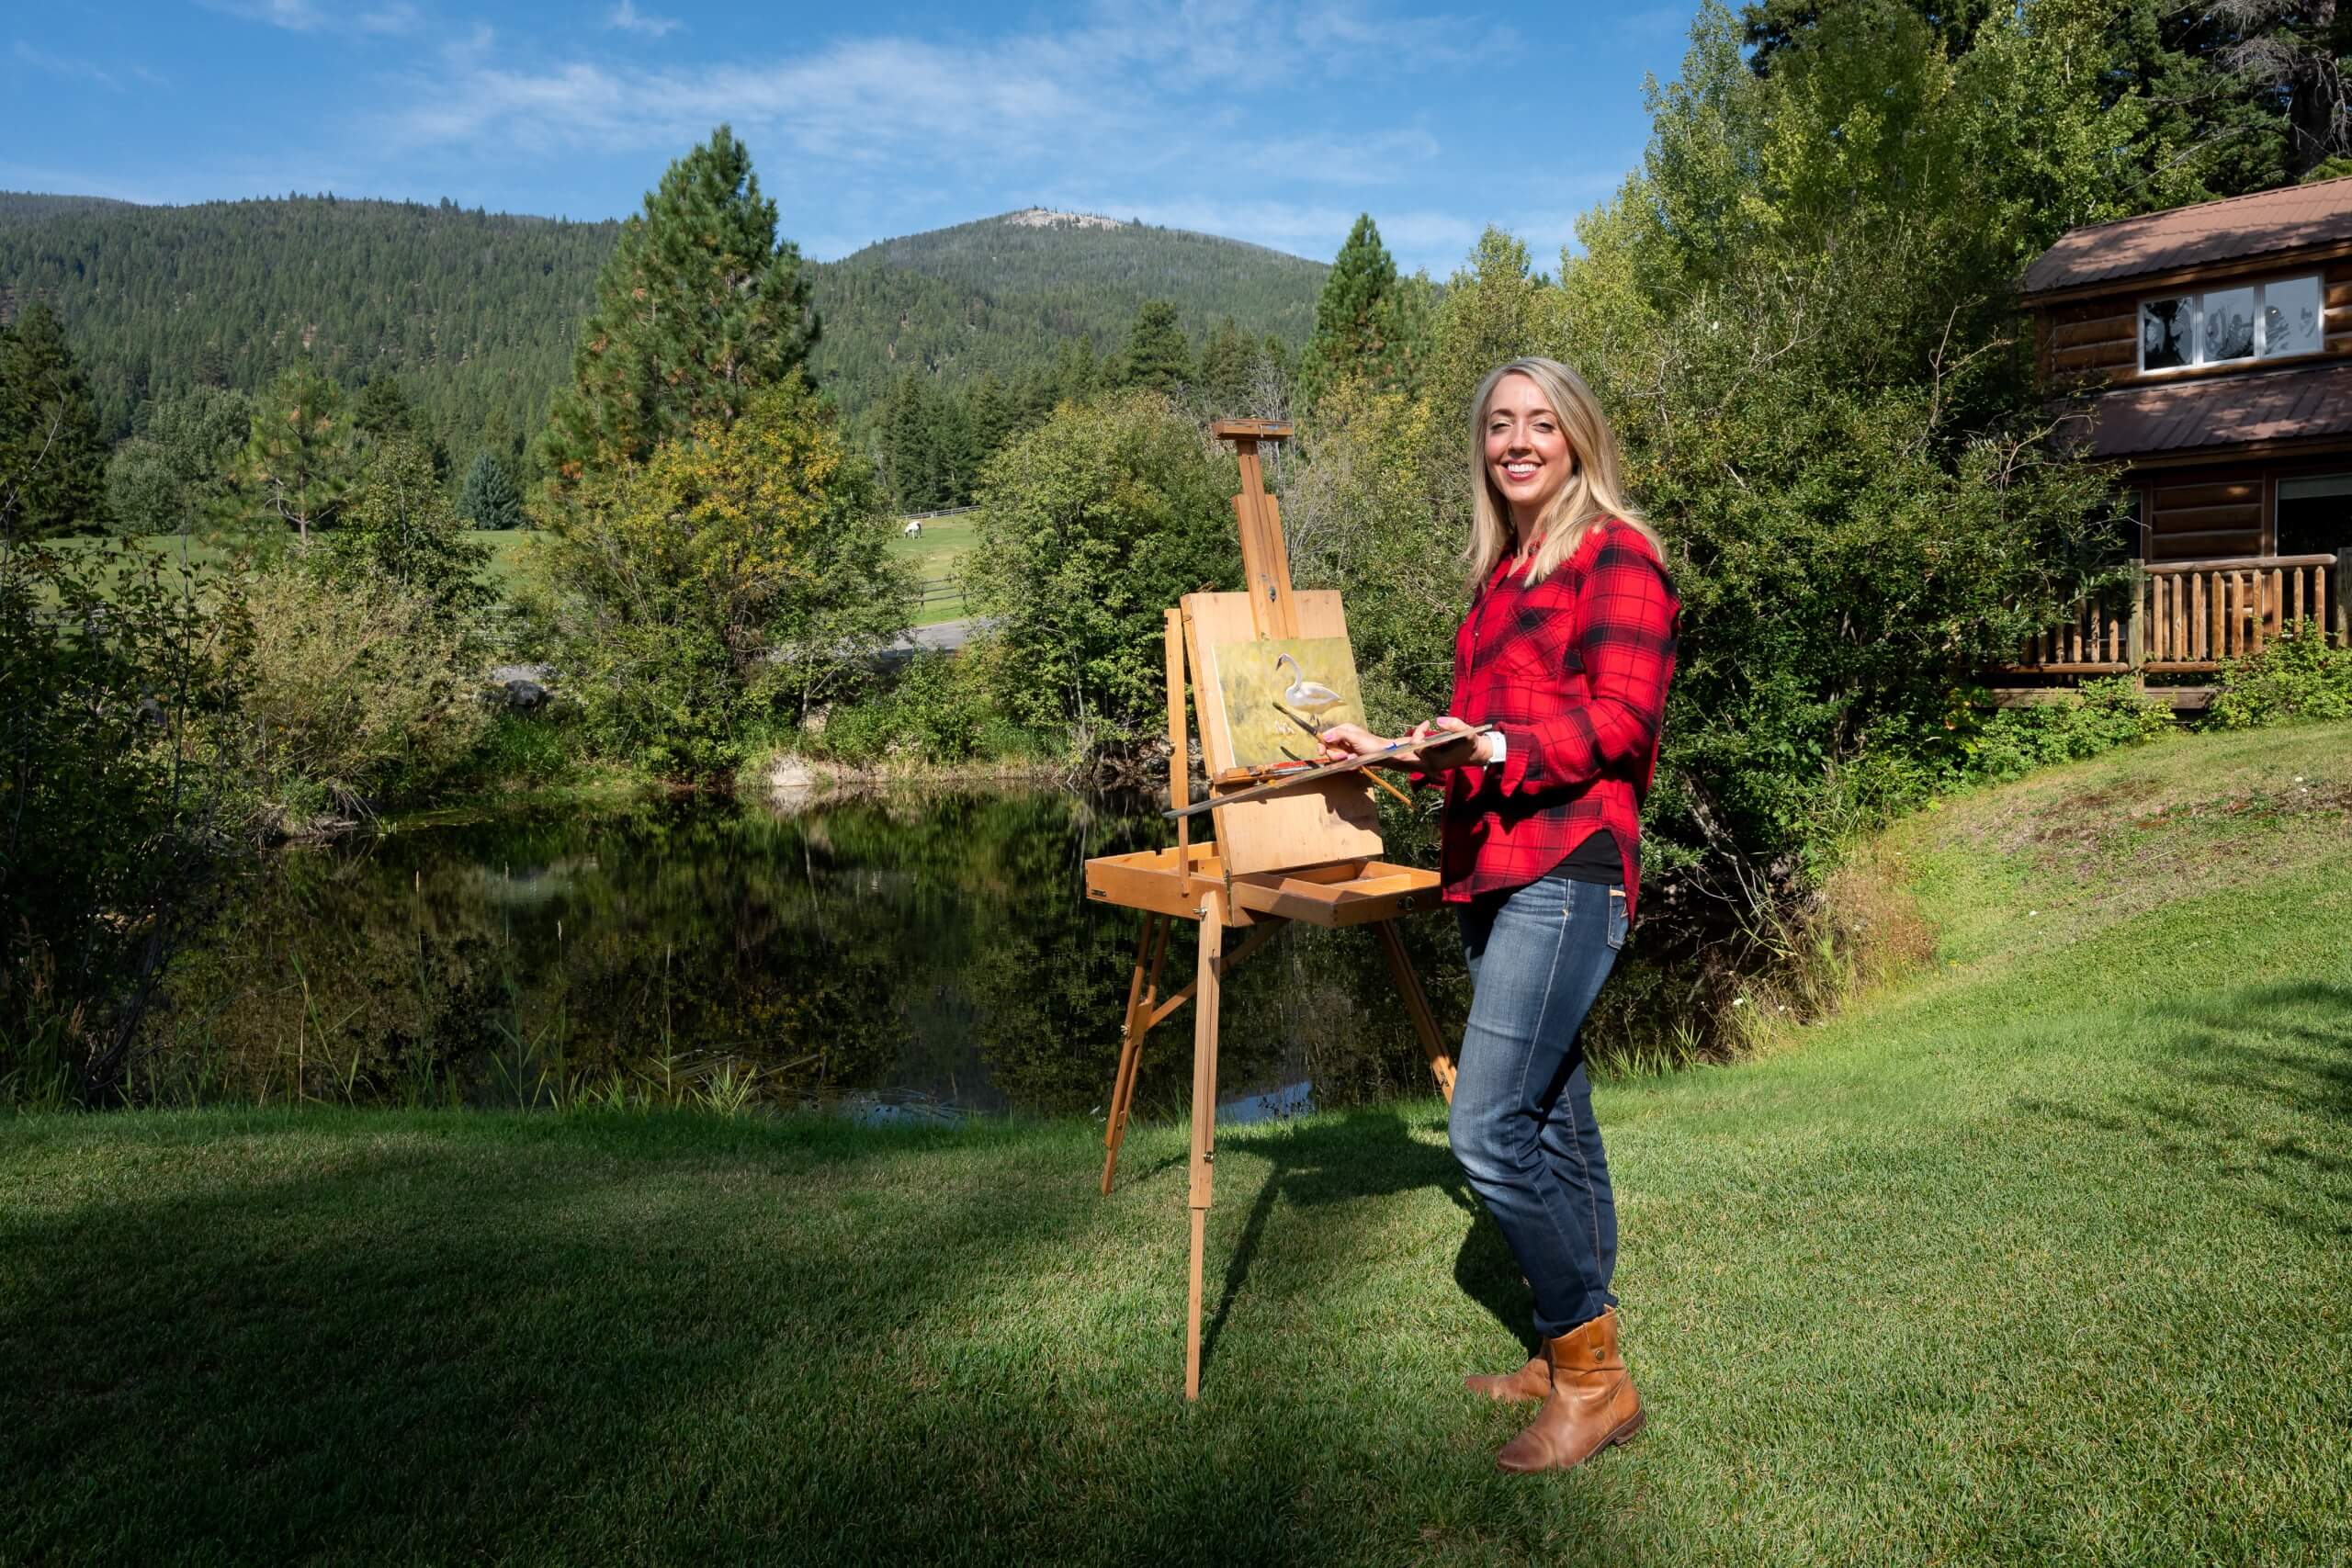 Sally Vannoy painting by the pond with mountains in the background.